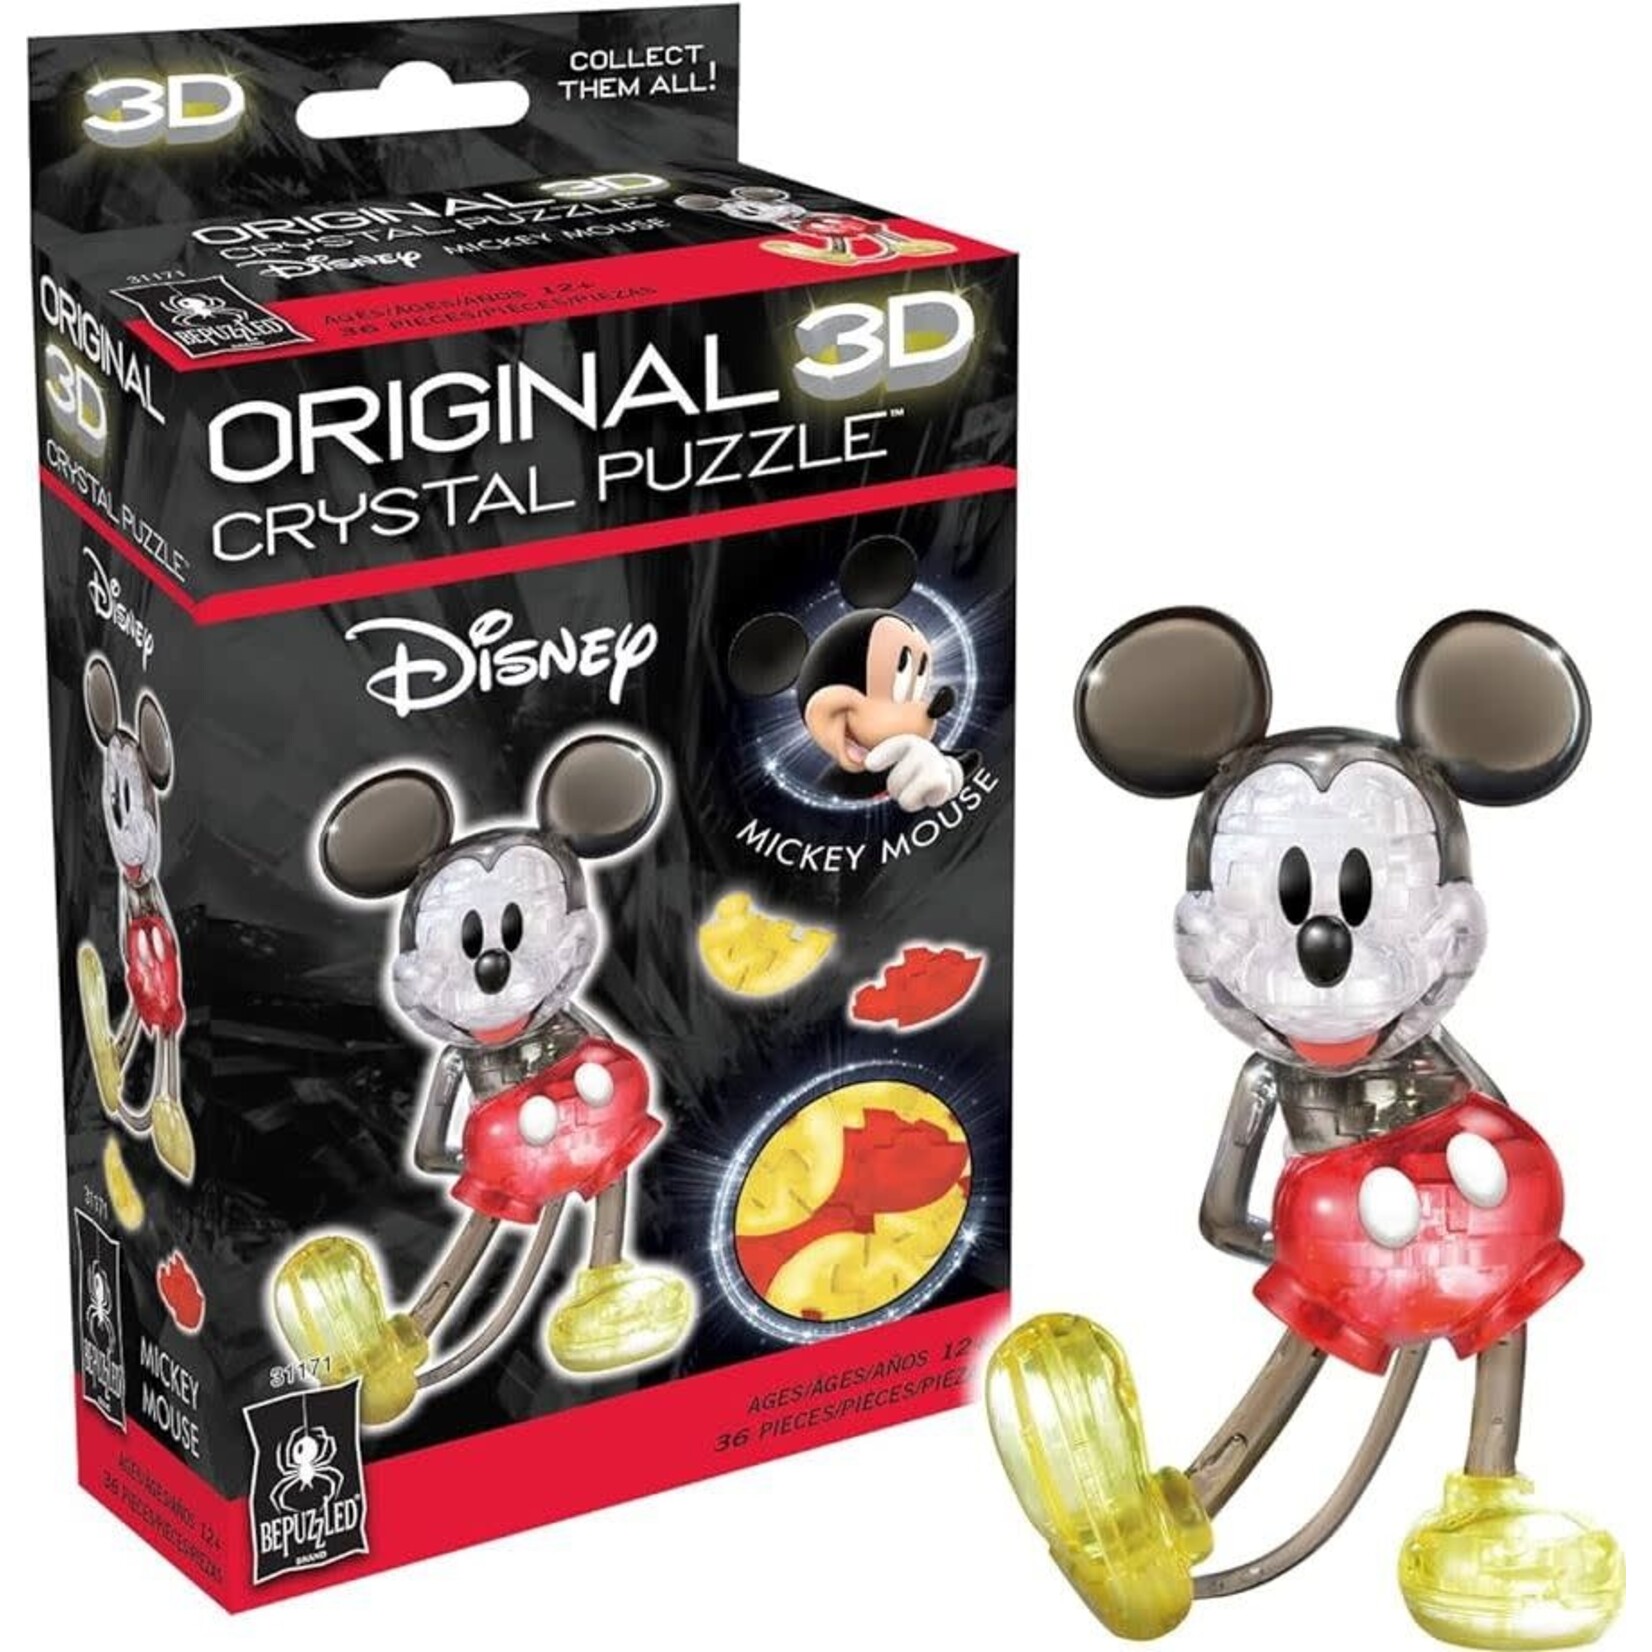 3D Crystal: Mickey Mouse Puzzle (Multi-Color)